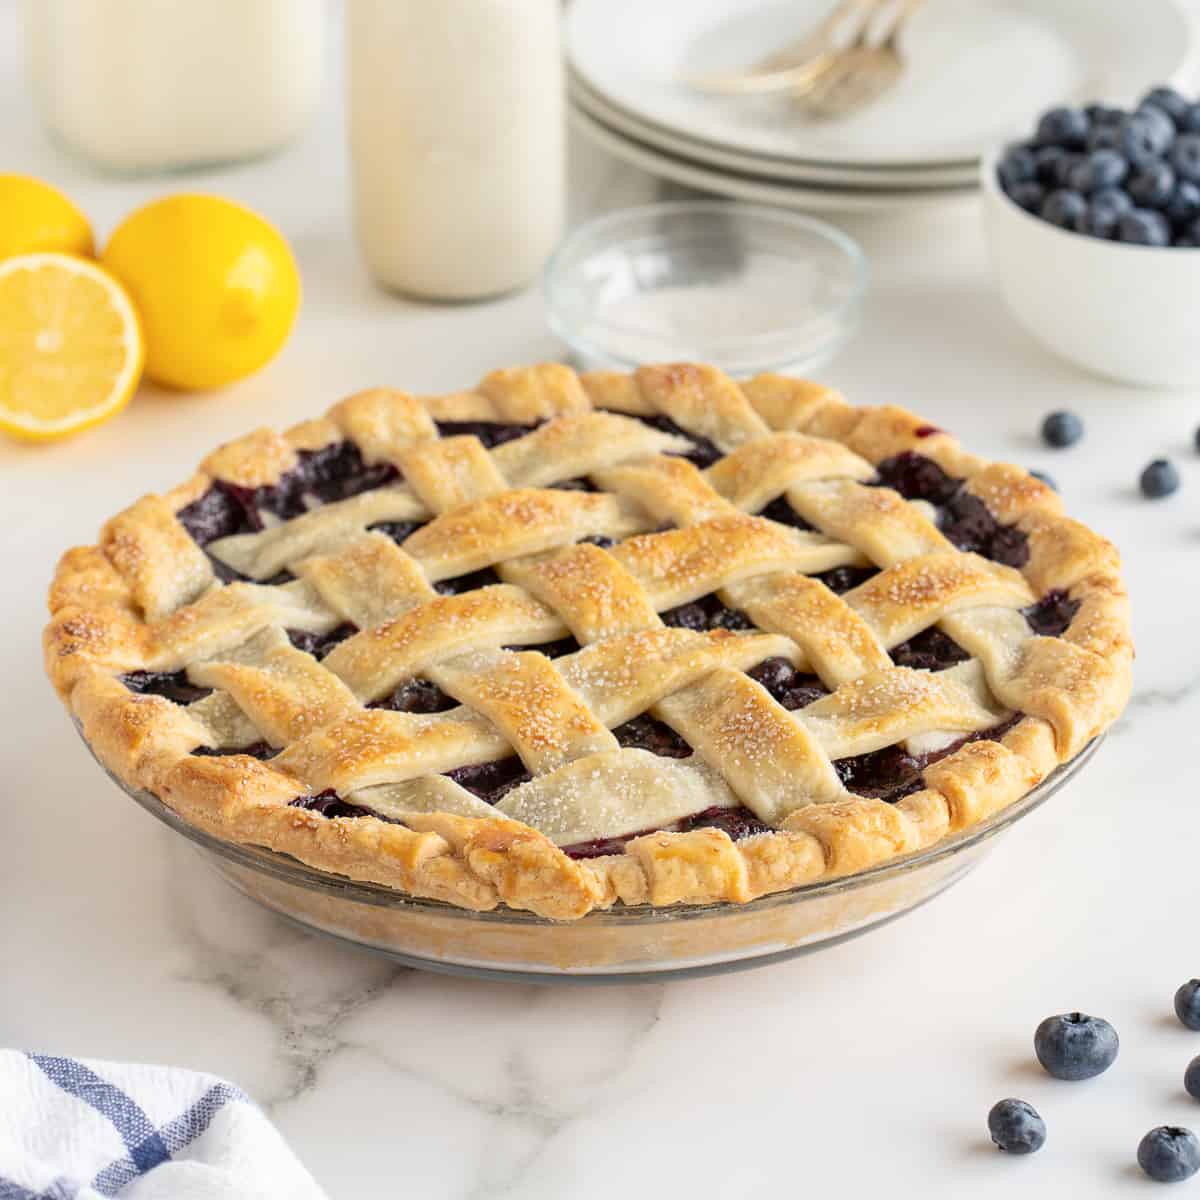 A blueberry pie with a lattice crust on a white kitchen counter.